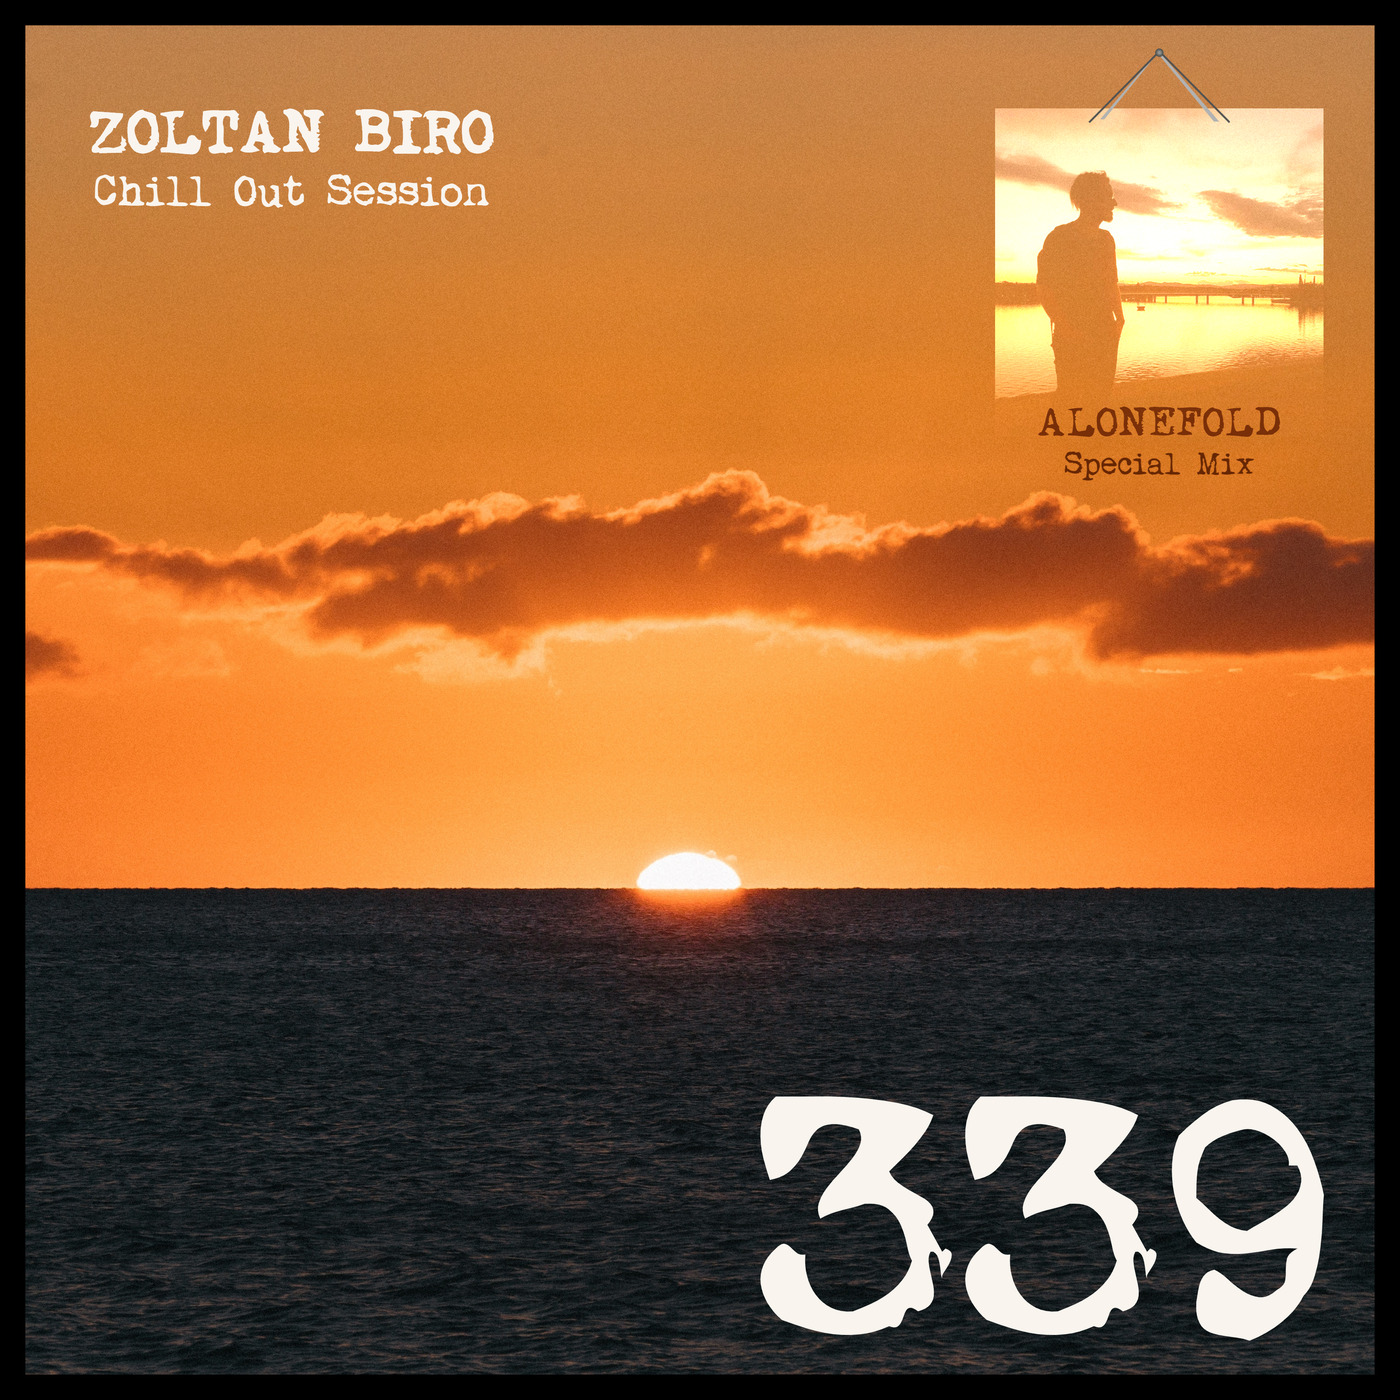 Zoltan Biro - Chill Out Session 339 [including: Alonefold Special Mix]